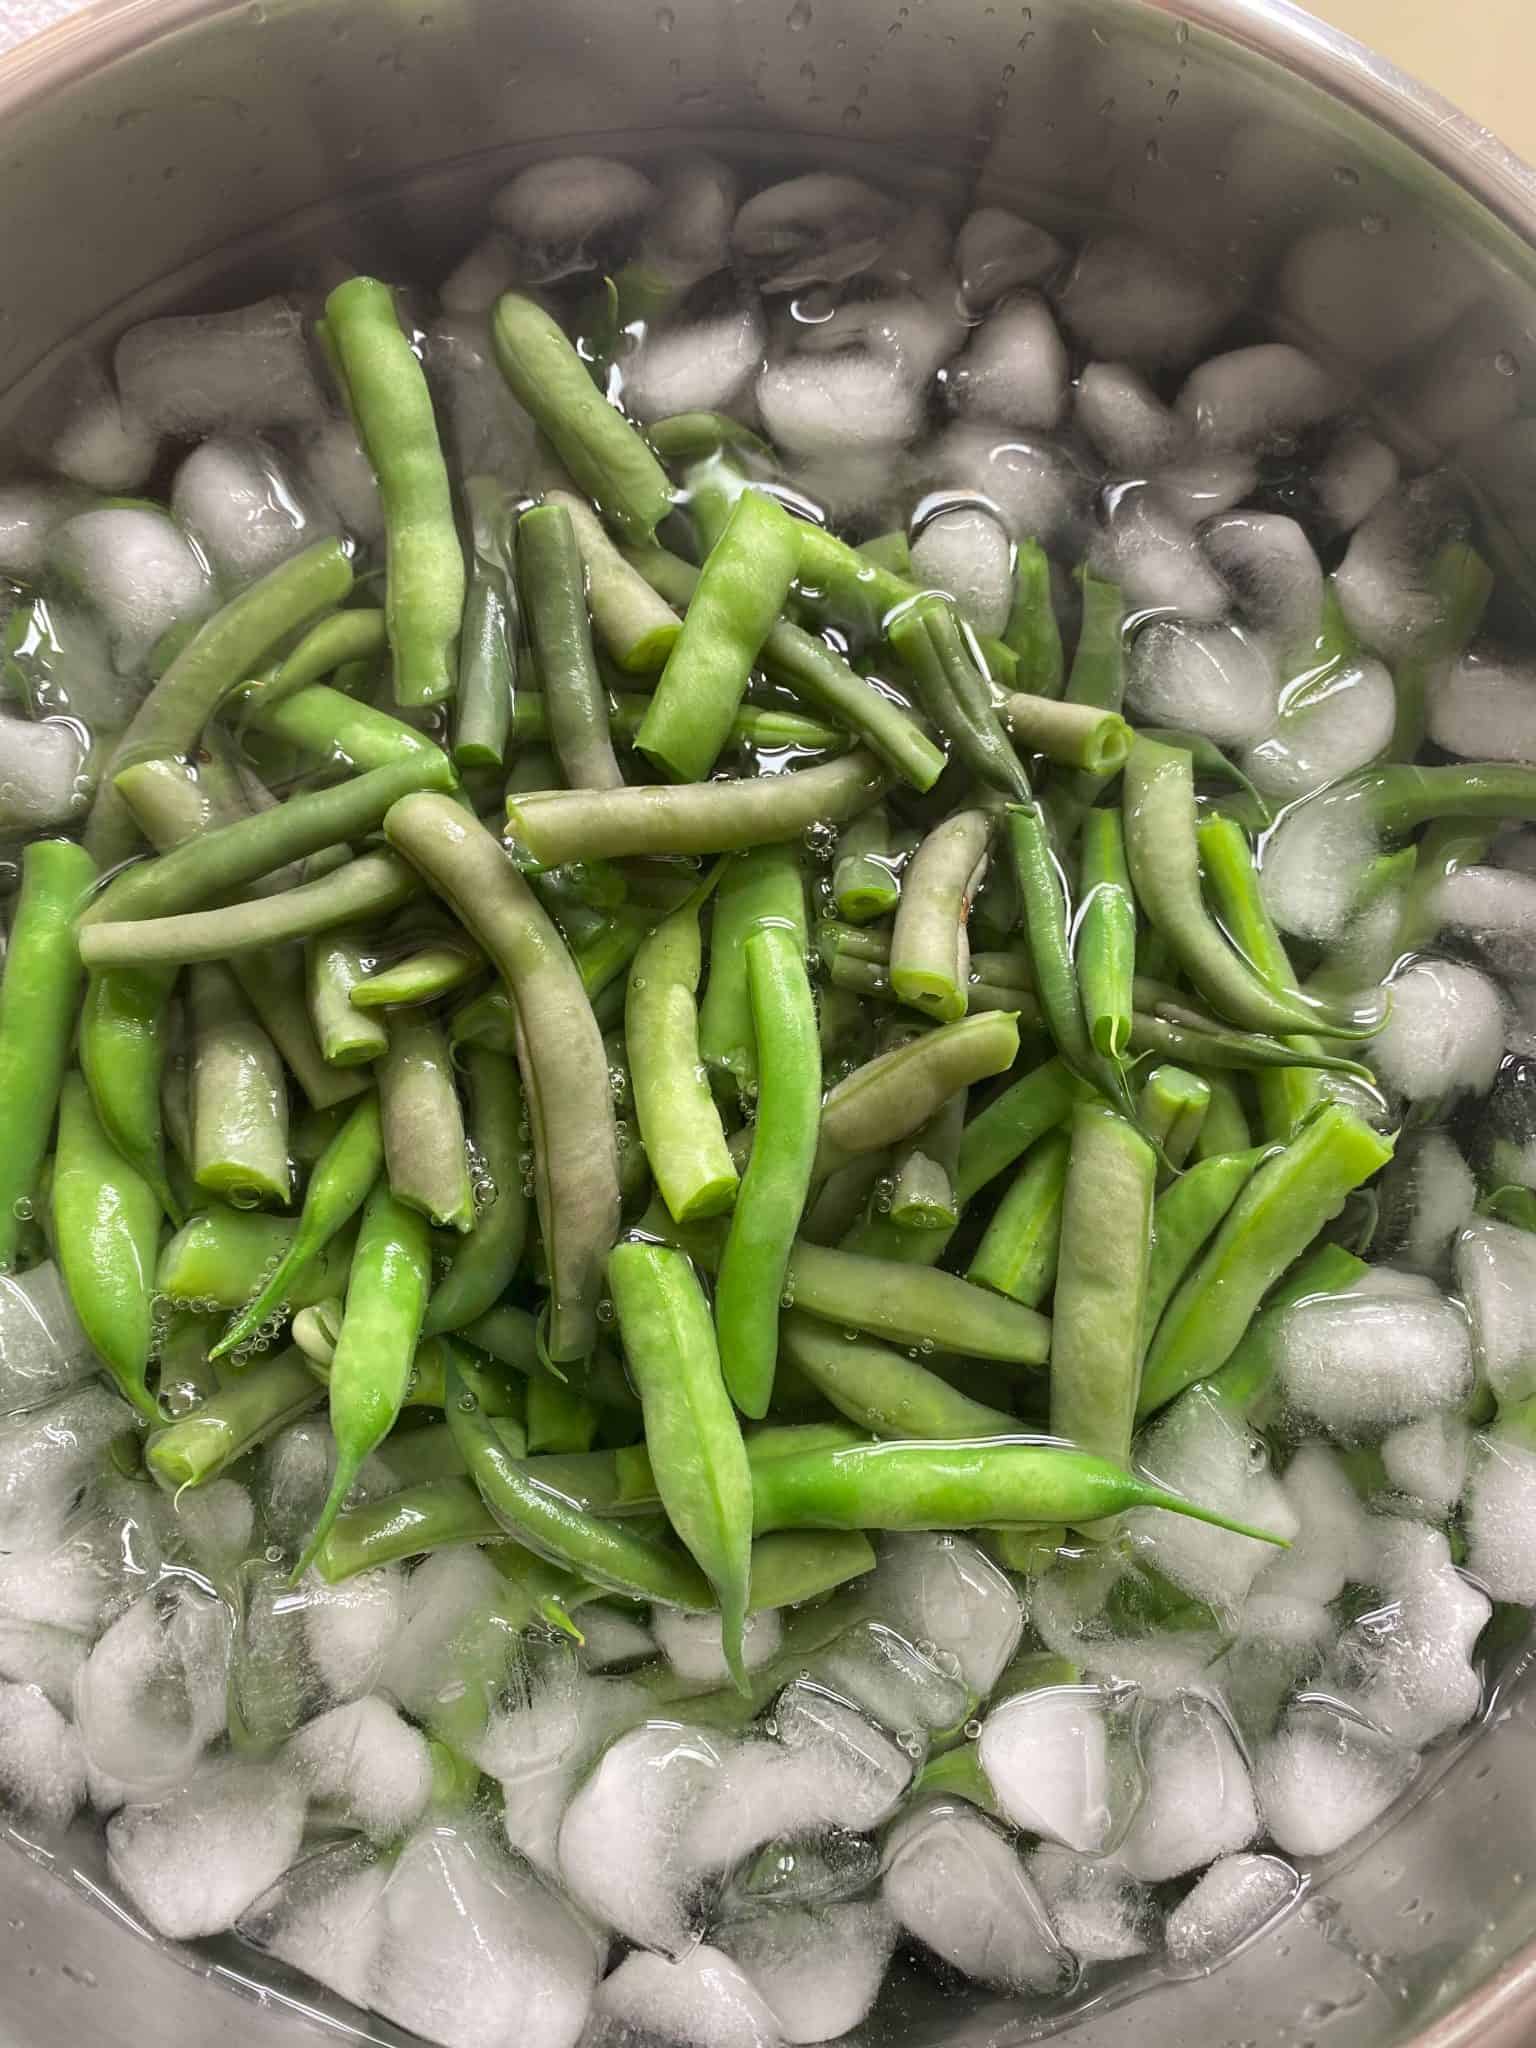 Blanched beans in ice bath.